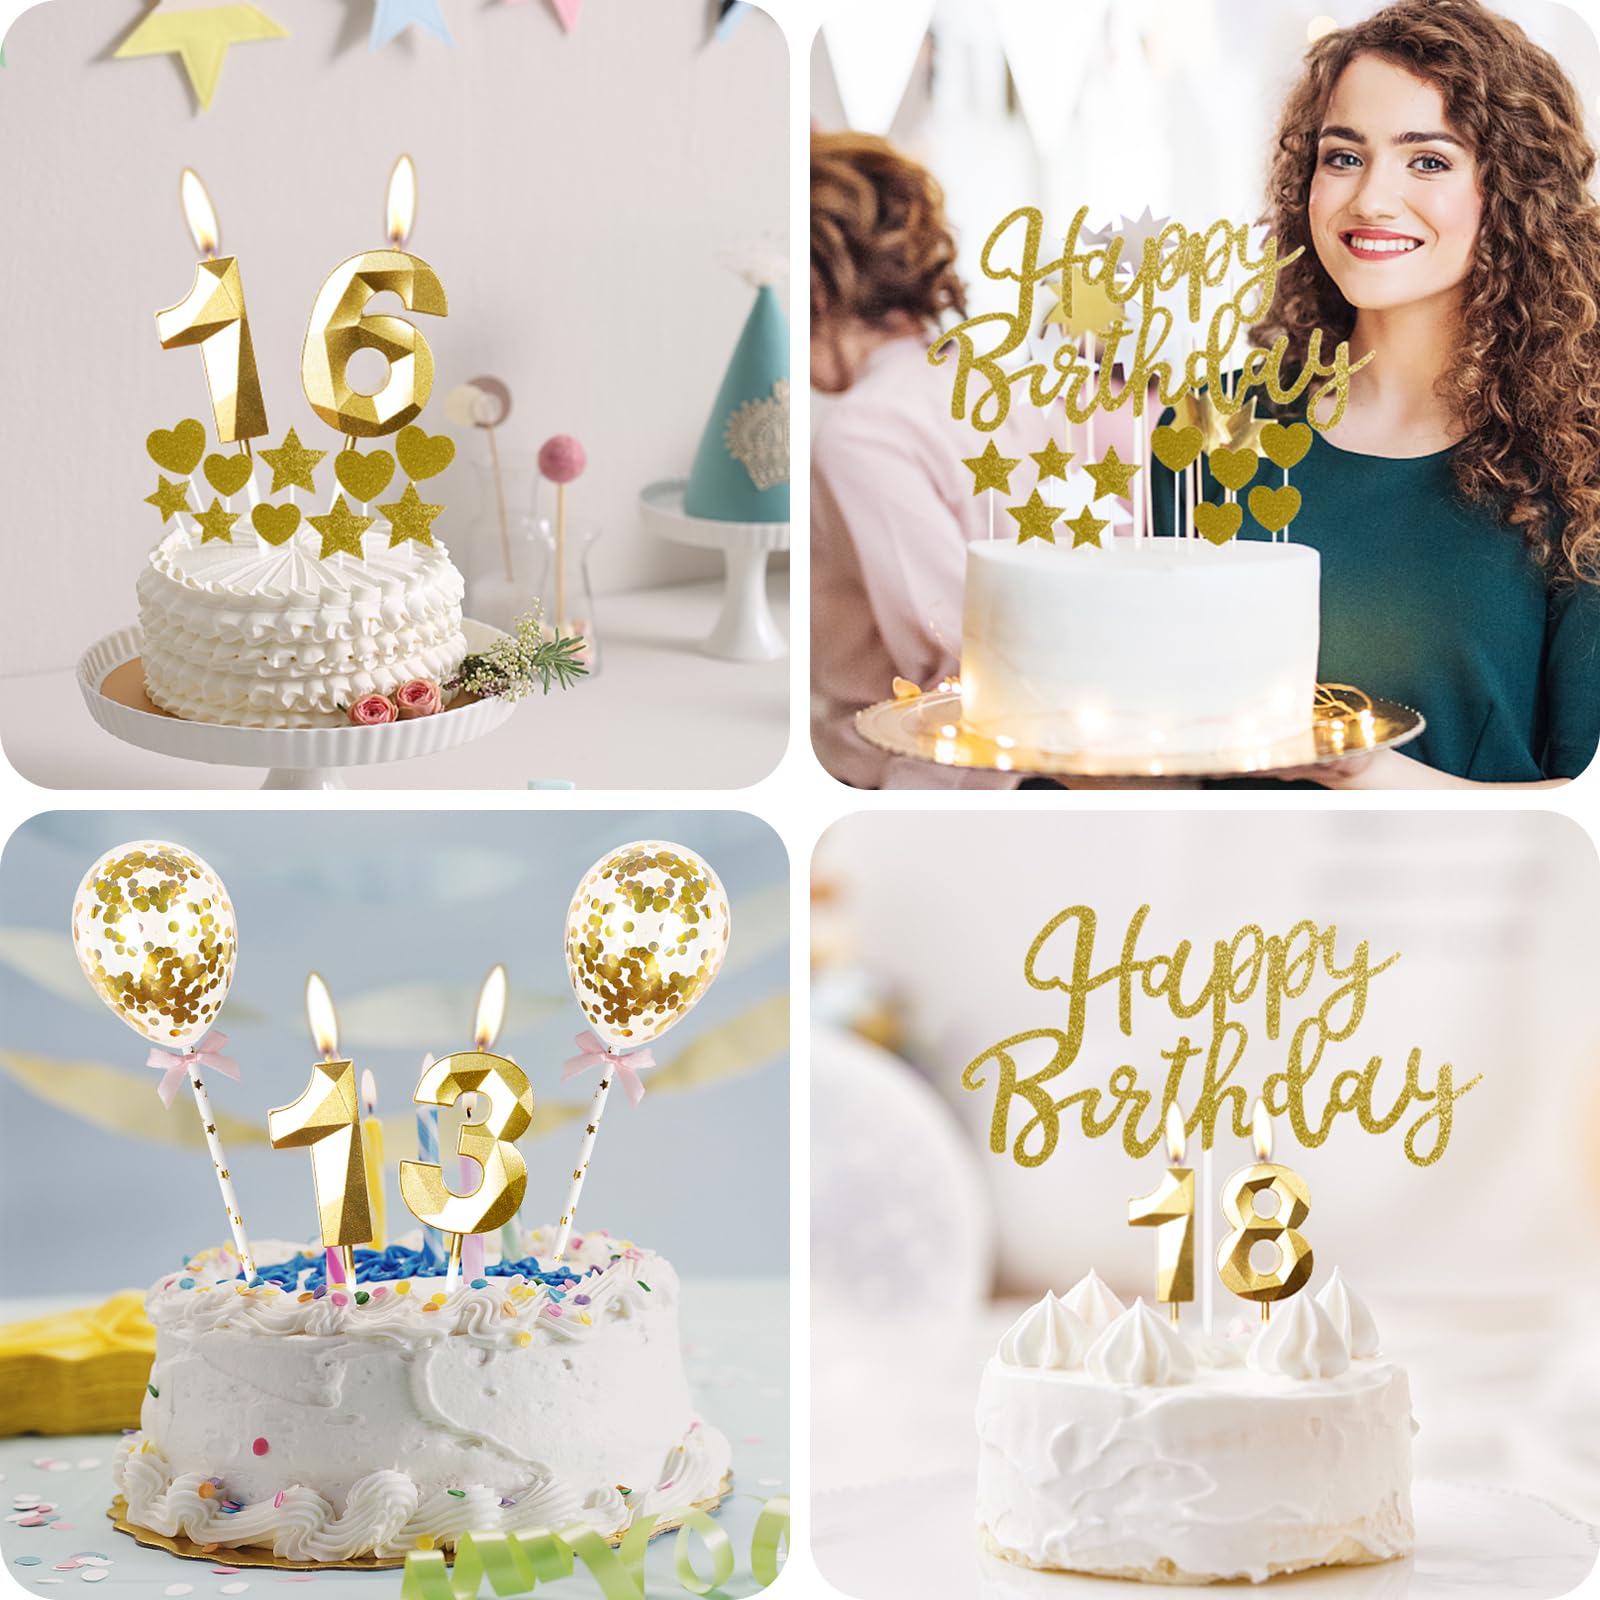 Mciskin 13th Happy Birthday Candles Glitter Happy Birthday Cake topper Gold Happy Birthday Balloons Gold 13 Candle Wedding Cake Star/Heart Cupcake Toppers Decorations for Girls Women Birthday Party